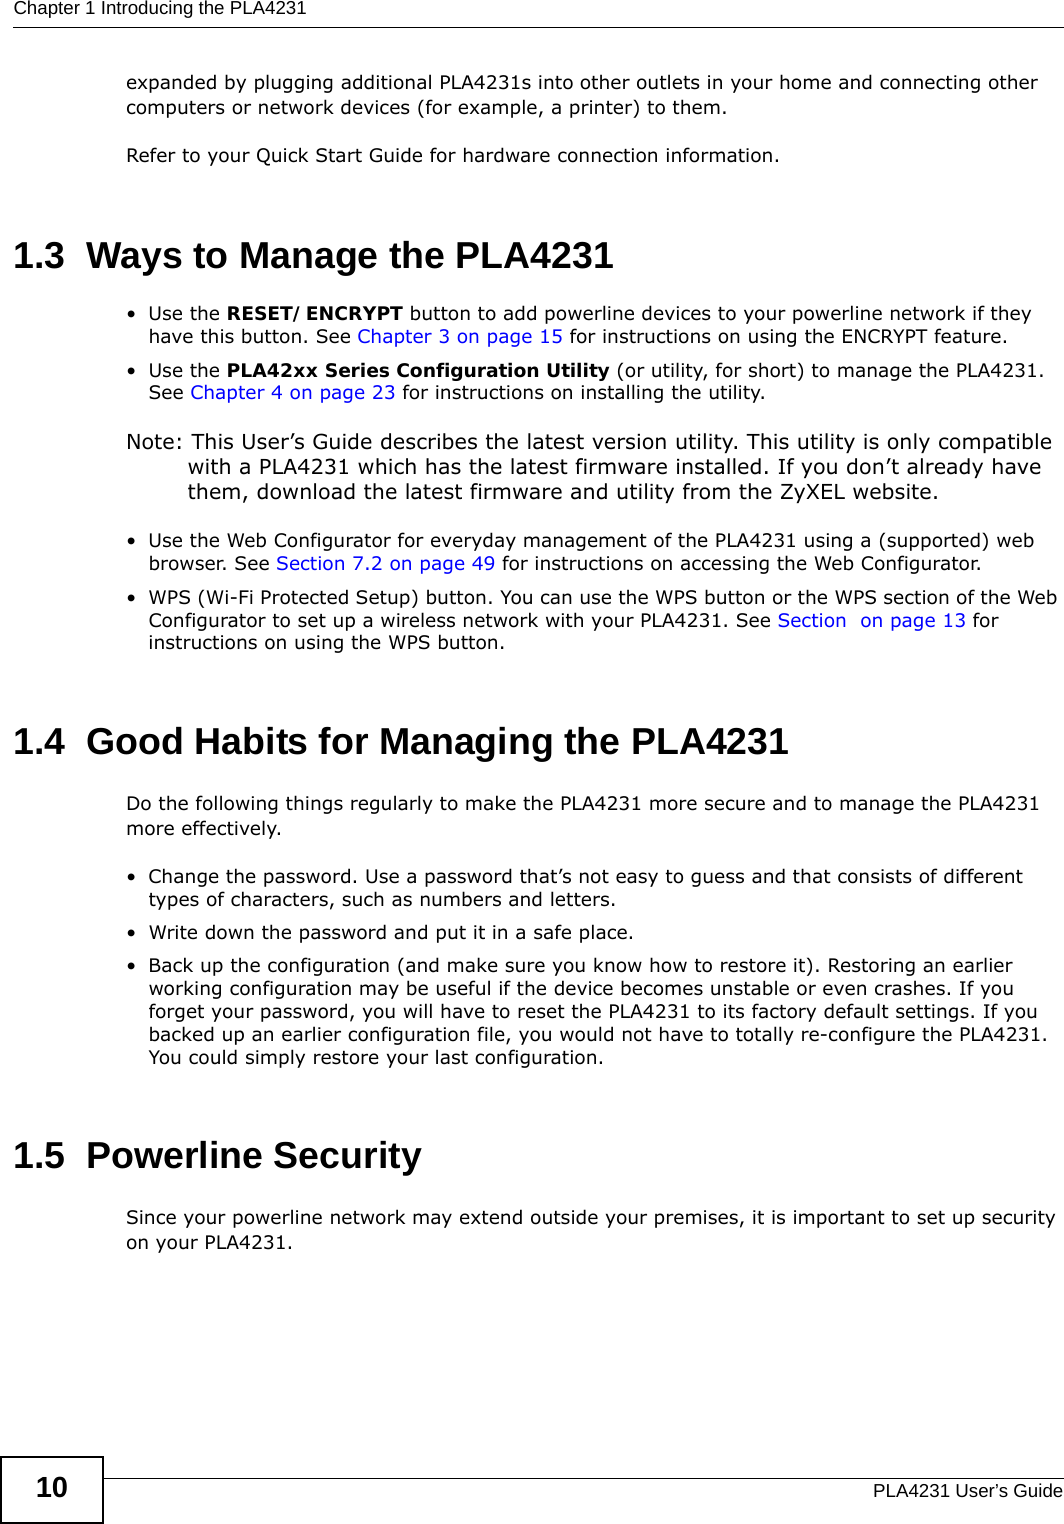 Chapter 1 Introducing the PLA4231PLA4231 User’s Guide10expanded by plugging additional PLA4231s into other outlets in your home and connecting other computers or network devices (for example, a printer) to them. Refer to your Quick Start Guide for hardware connection information. 1.3  Ways to Manage the PLA4231•Use the RESET/ENCRYPT button to add powerline devices to your powerline network if they have this button. See Chapter 3 on page 15 for instructions on using the ENCRYPT feature.•Use the PLA42xx Series Configuration Utility (or utility, for short) to manage the PLA4231. See Chapter 4 on page 23 for instructions on installing the utility.Note: This User’s Guide describes the latest version utility. This utility is only compatible with a PLA4231 which has the latest firmware installed. If you don’t already have them, download the latest firmware and utility from the ZyXEL website.• Use the Web Configurator for everyday management of the PLA4231 using a (supported) web browser. See Section 7.2 on page 49 for instructions on accessing the Web Configurator.• WPS (Wi-Fi Protected Setup) button. You can use the WPS button or the WPS section of the Web Configurator to set up a wireless network with your PLA4231. See Section  on page 13 for instructions on using the WPS button.1.4  Good Habits for Managing the PLA4231Do the following things regularly to make the PLA4231 more secure and to manage the PLA4231 more effectively.• Change the password. Use a password that’s not easy to guess and that consists of different types of characters, such as numbers and letters.• Write down the password and put it in a safe place.• Back up the configuration (and make sure you know how to restore it). Restoring an earlier working configuration may be useful if the device becomes unstable or even crashes. If you forget your password, you will have to reset the PLA4231 to its factory default settings. If you backed up an earlier configuration file, you would not have to totally re-configure the PLA4231. You could simply restore your last configuration.1.5  Powerline SecuritySince your powerline network may extend outside your premises, it is important to set up security on your PLA4231.